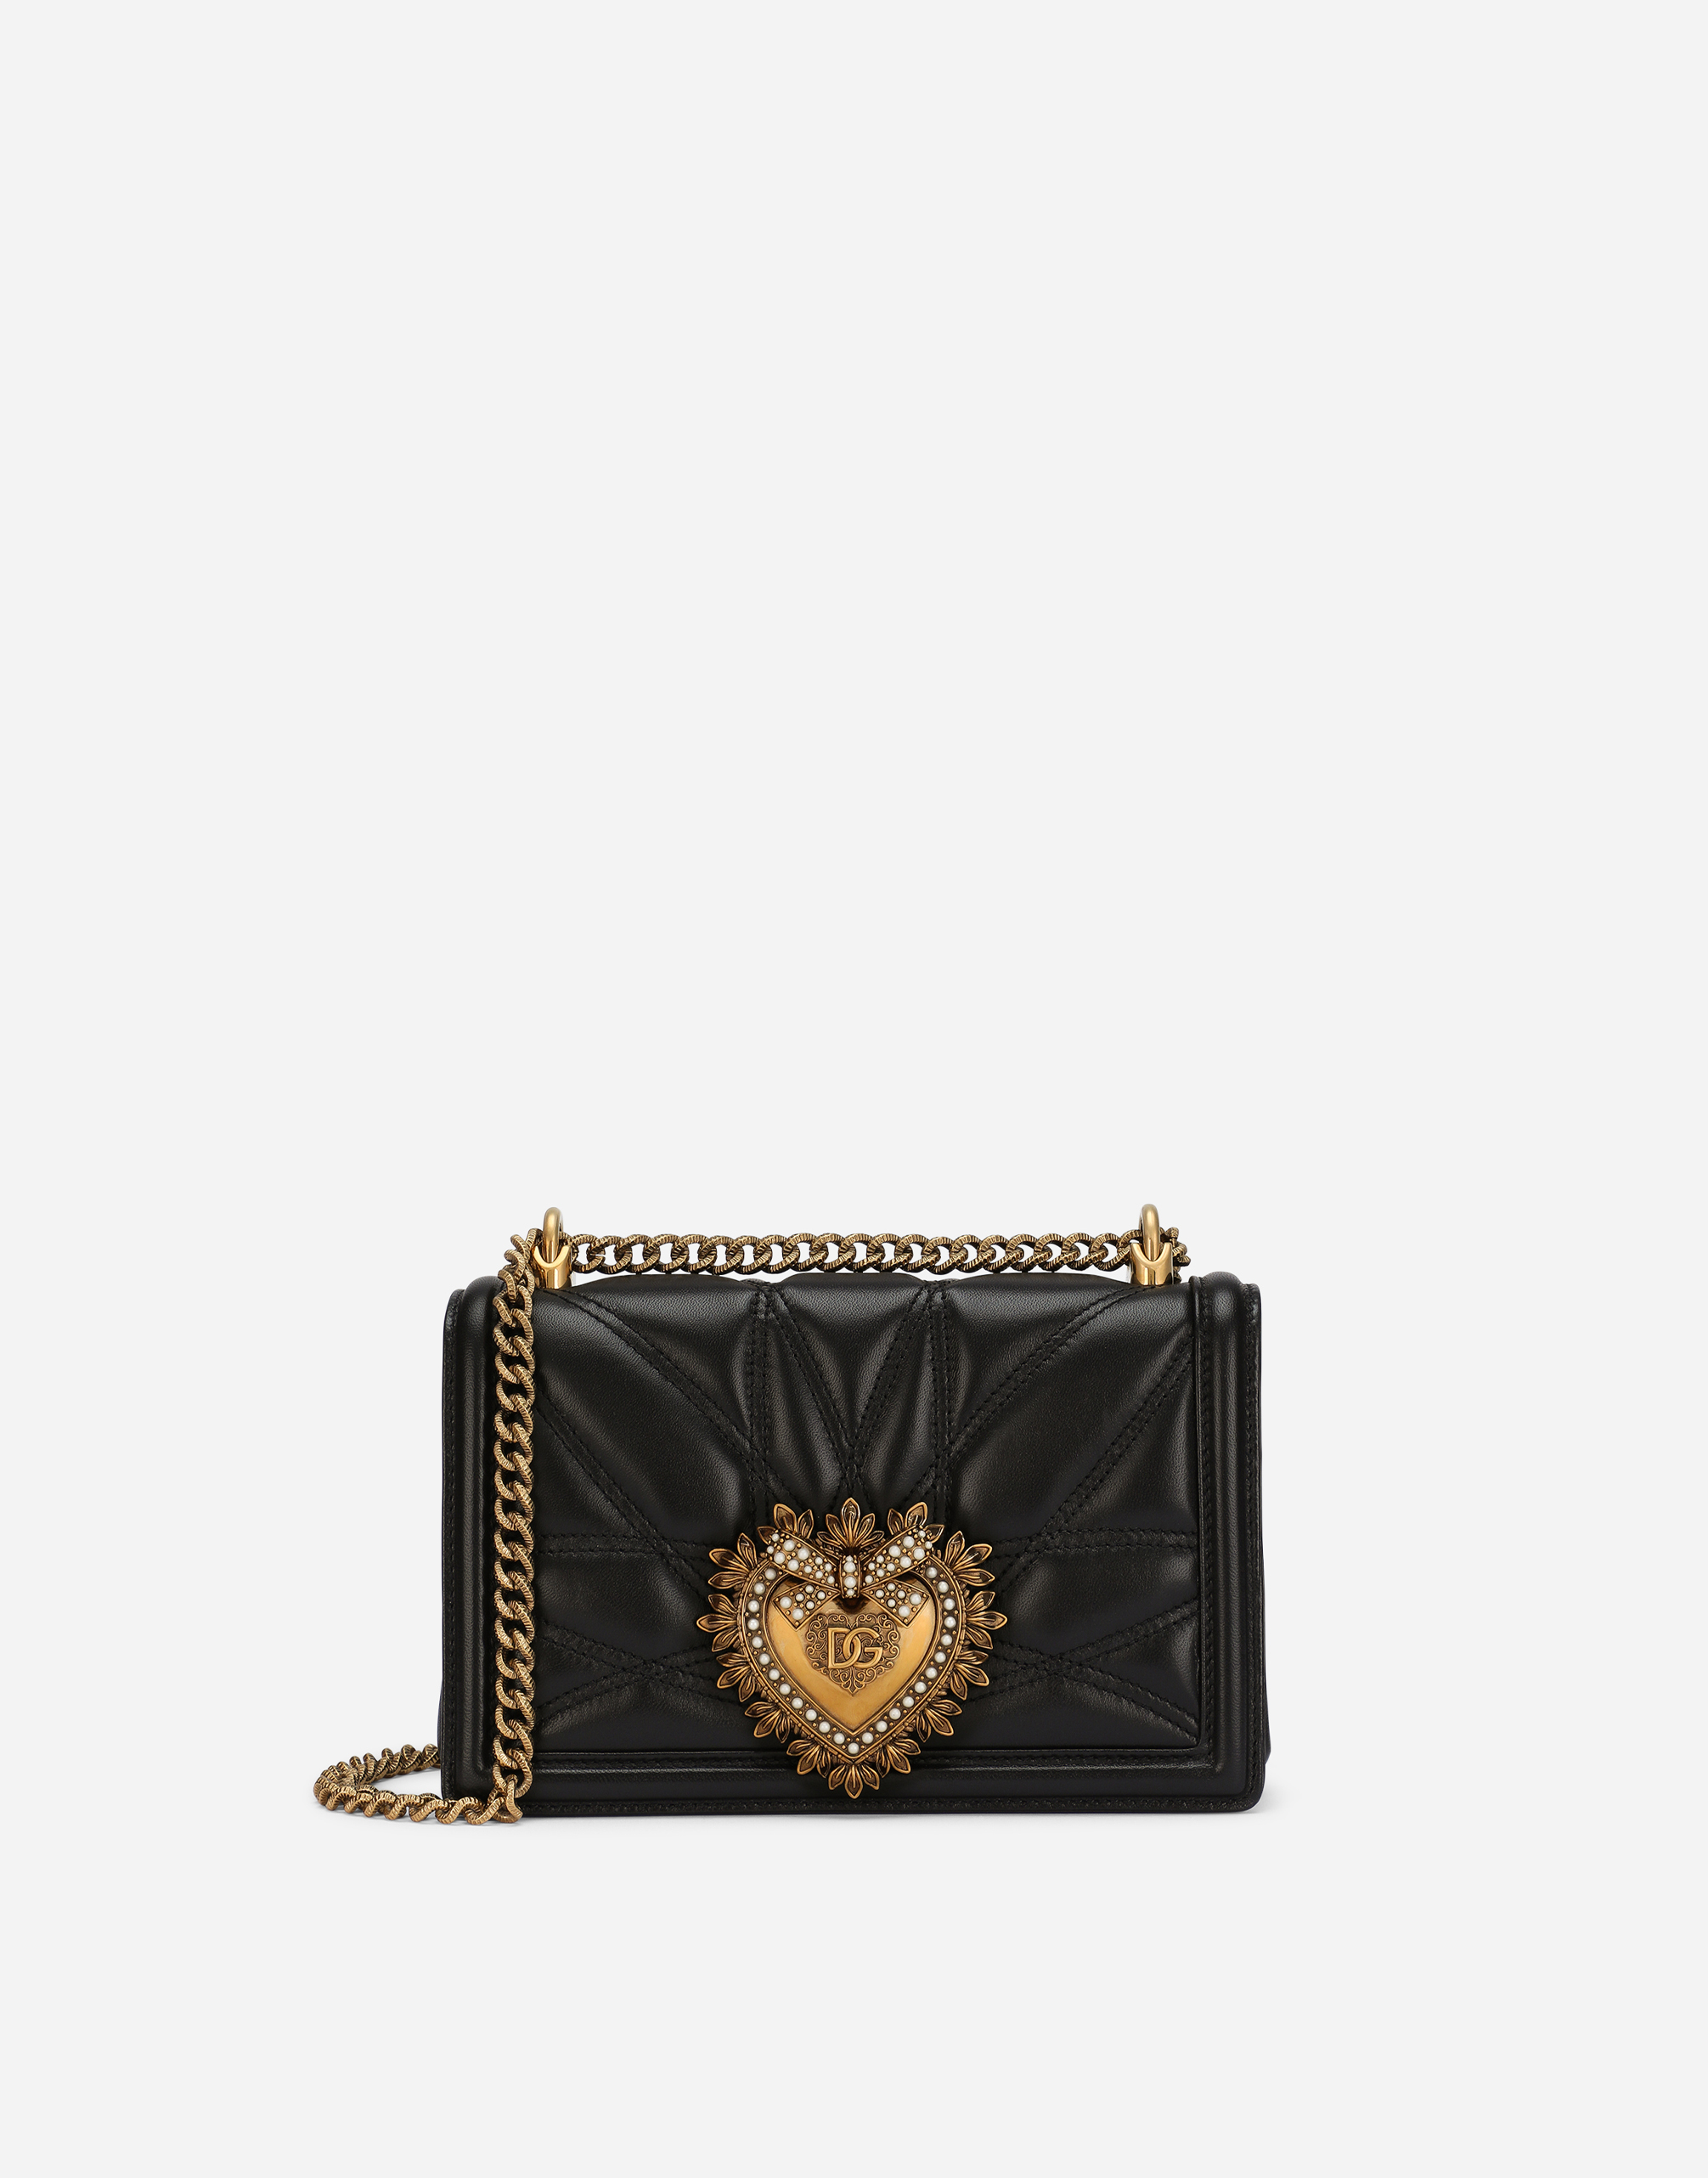 Medium Devotion bag in quilted nappa leather in Black